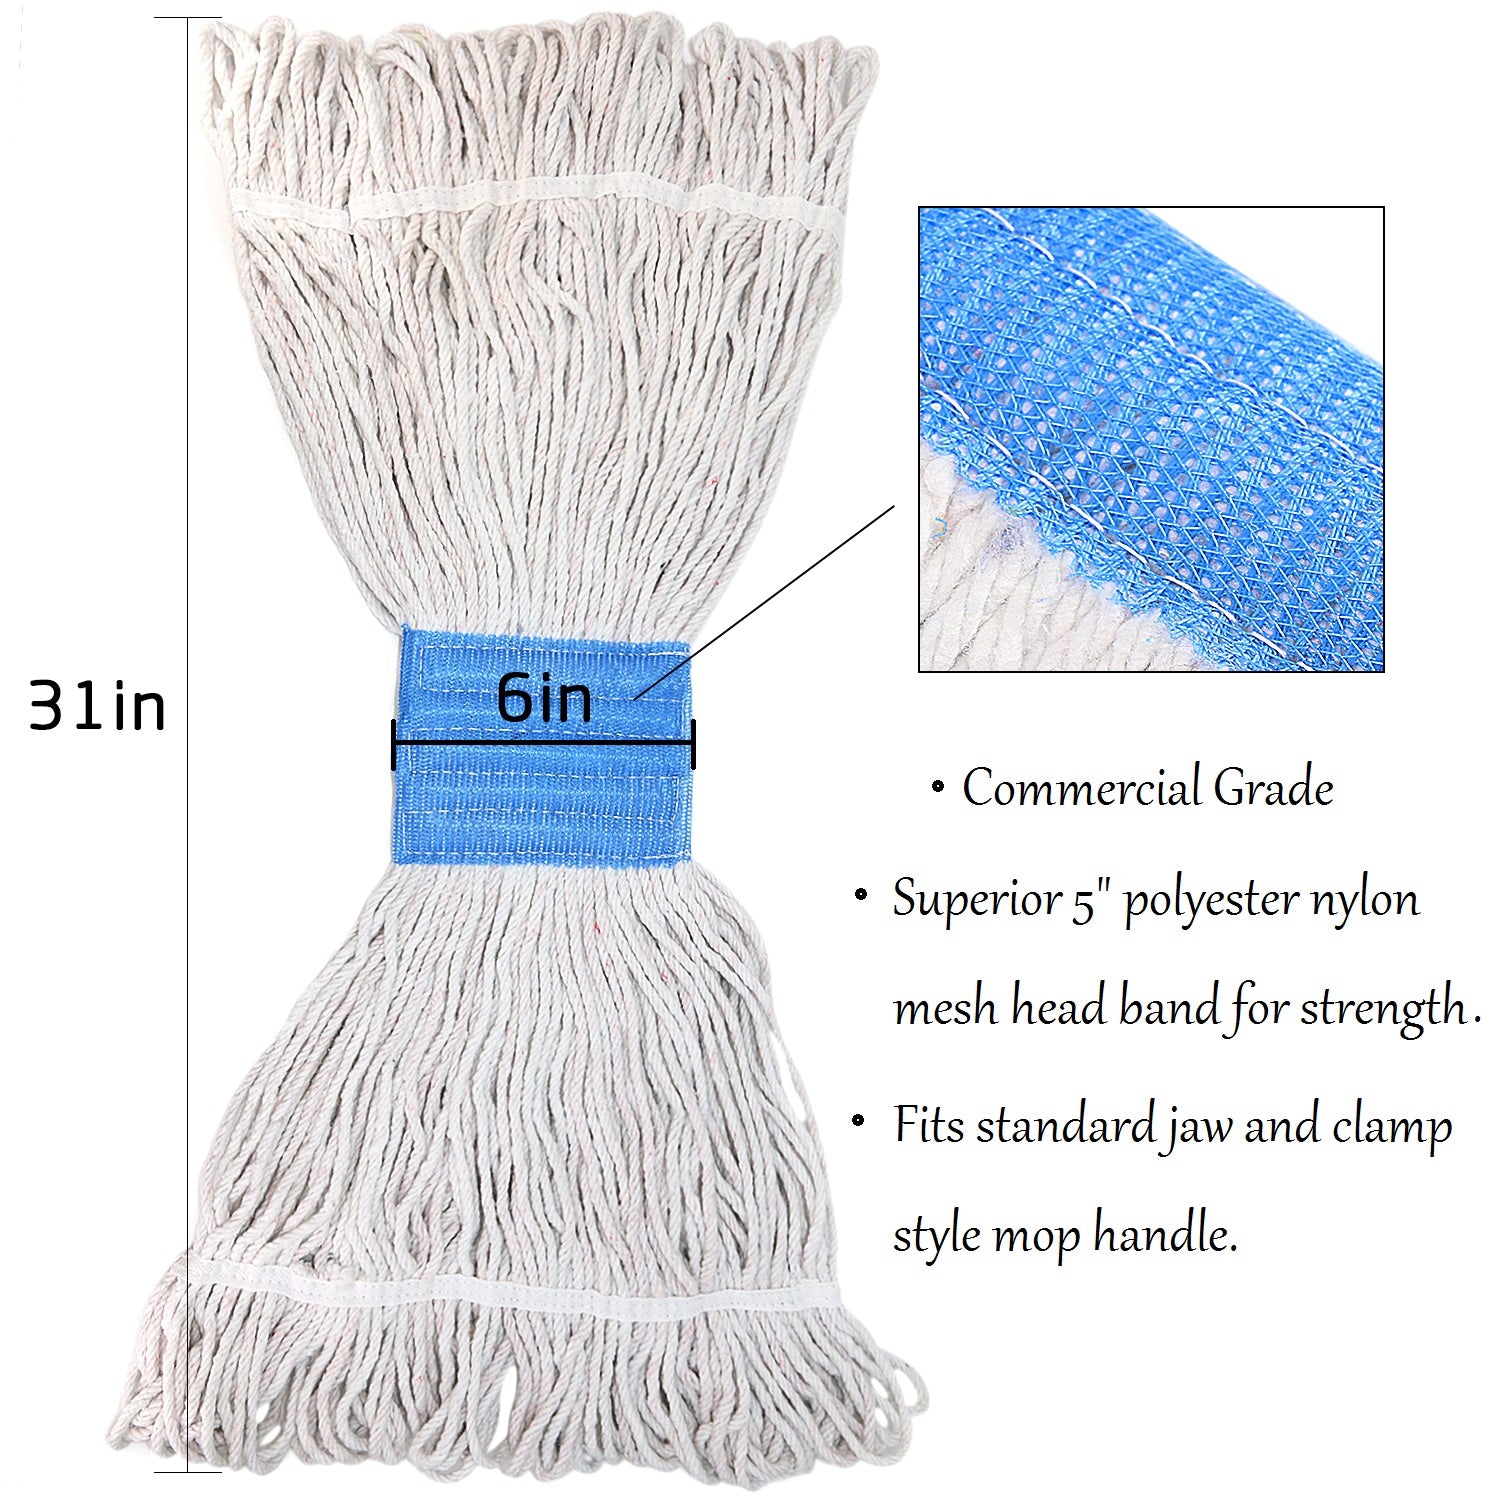 Bonison Commercial Use Wringer Style Replacement Mop Head For Clamp Mop With Looped Ends And Yarn Tailband, Heavy Duty And Long Lasting. (1, White)